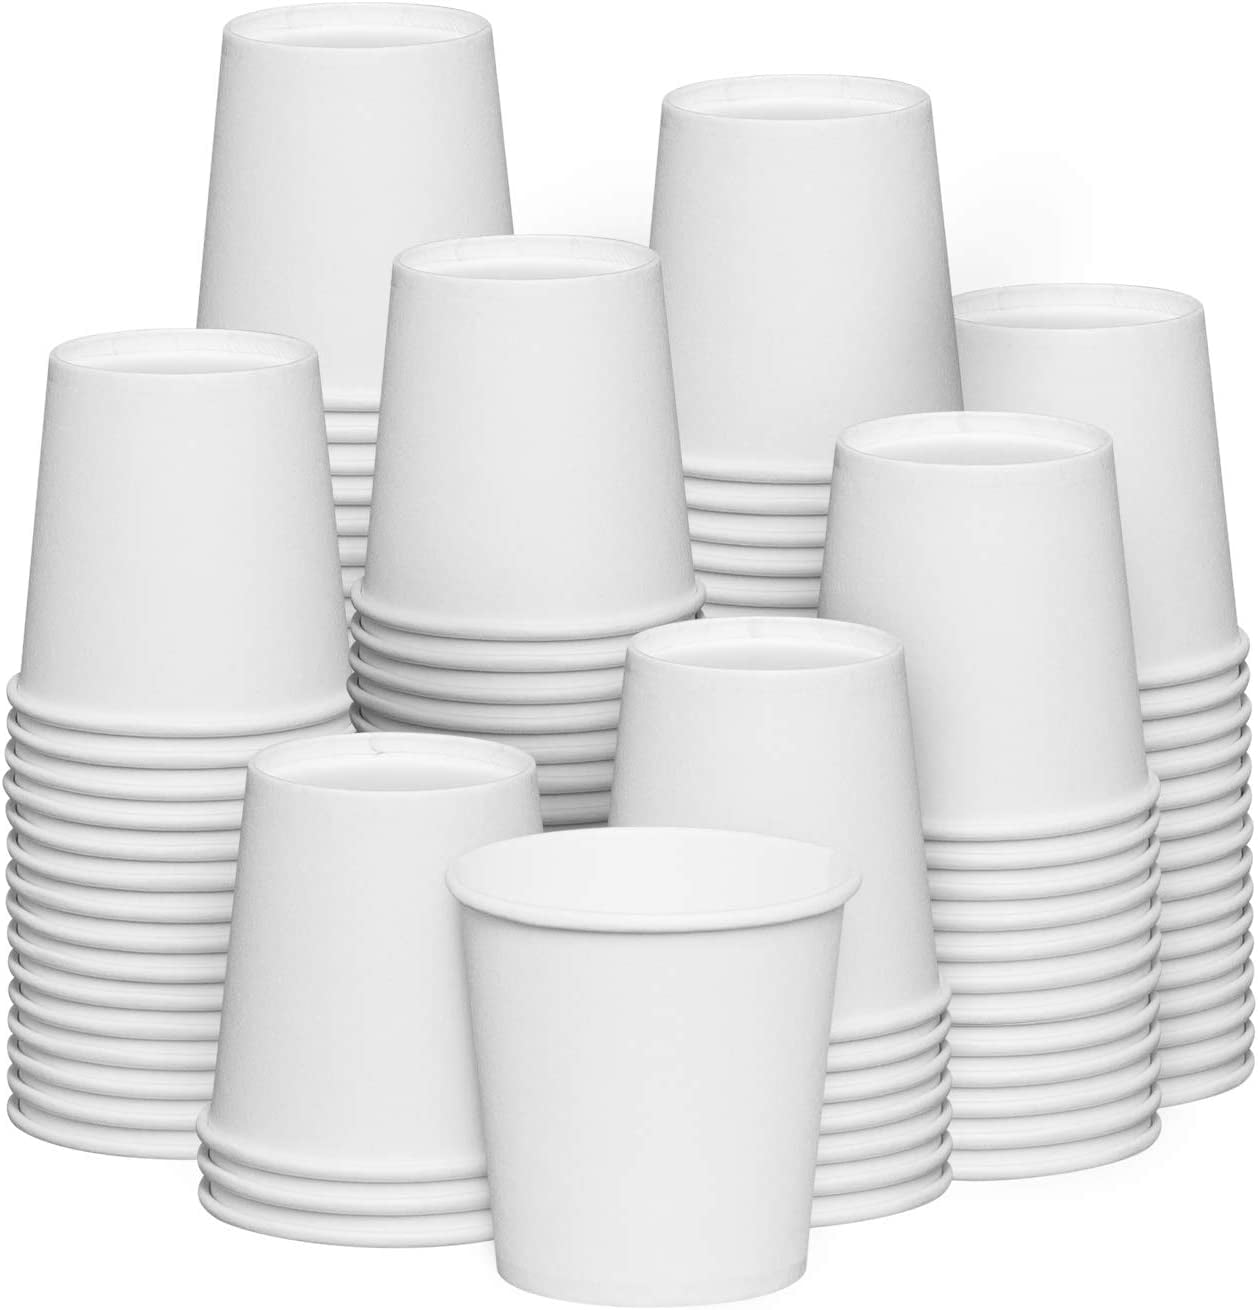 Comfy Package 4 Oz White Paper Cups Disposable Coffee Cups Espresso ...